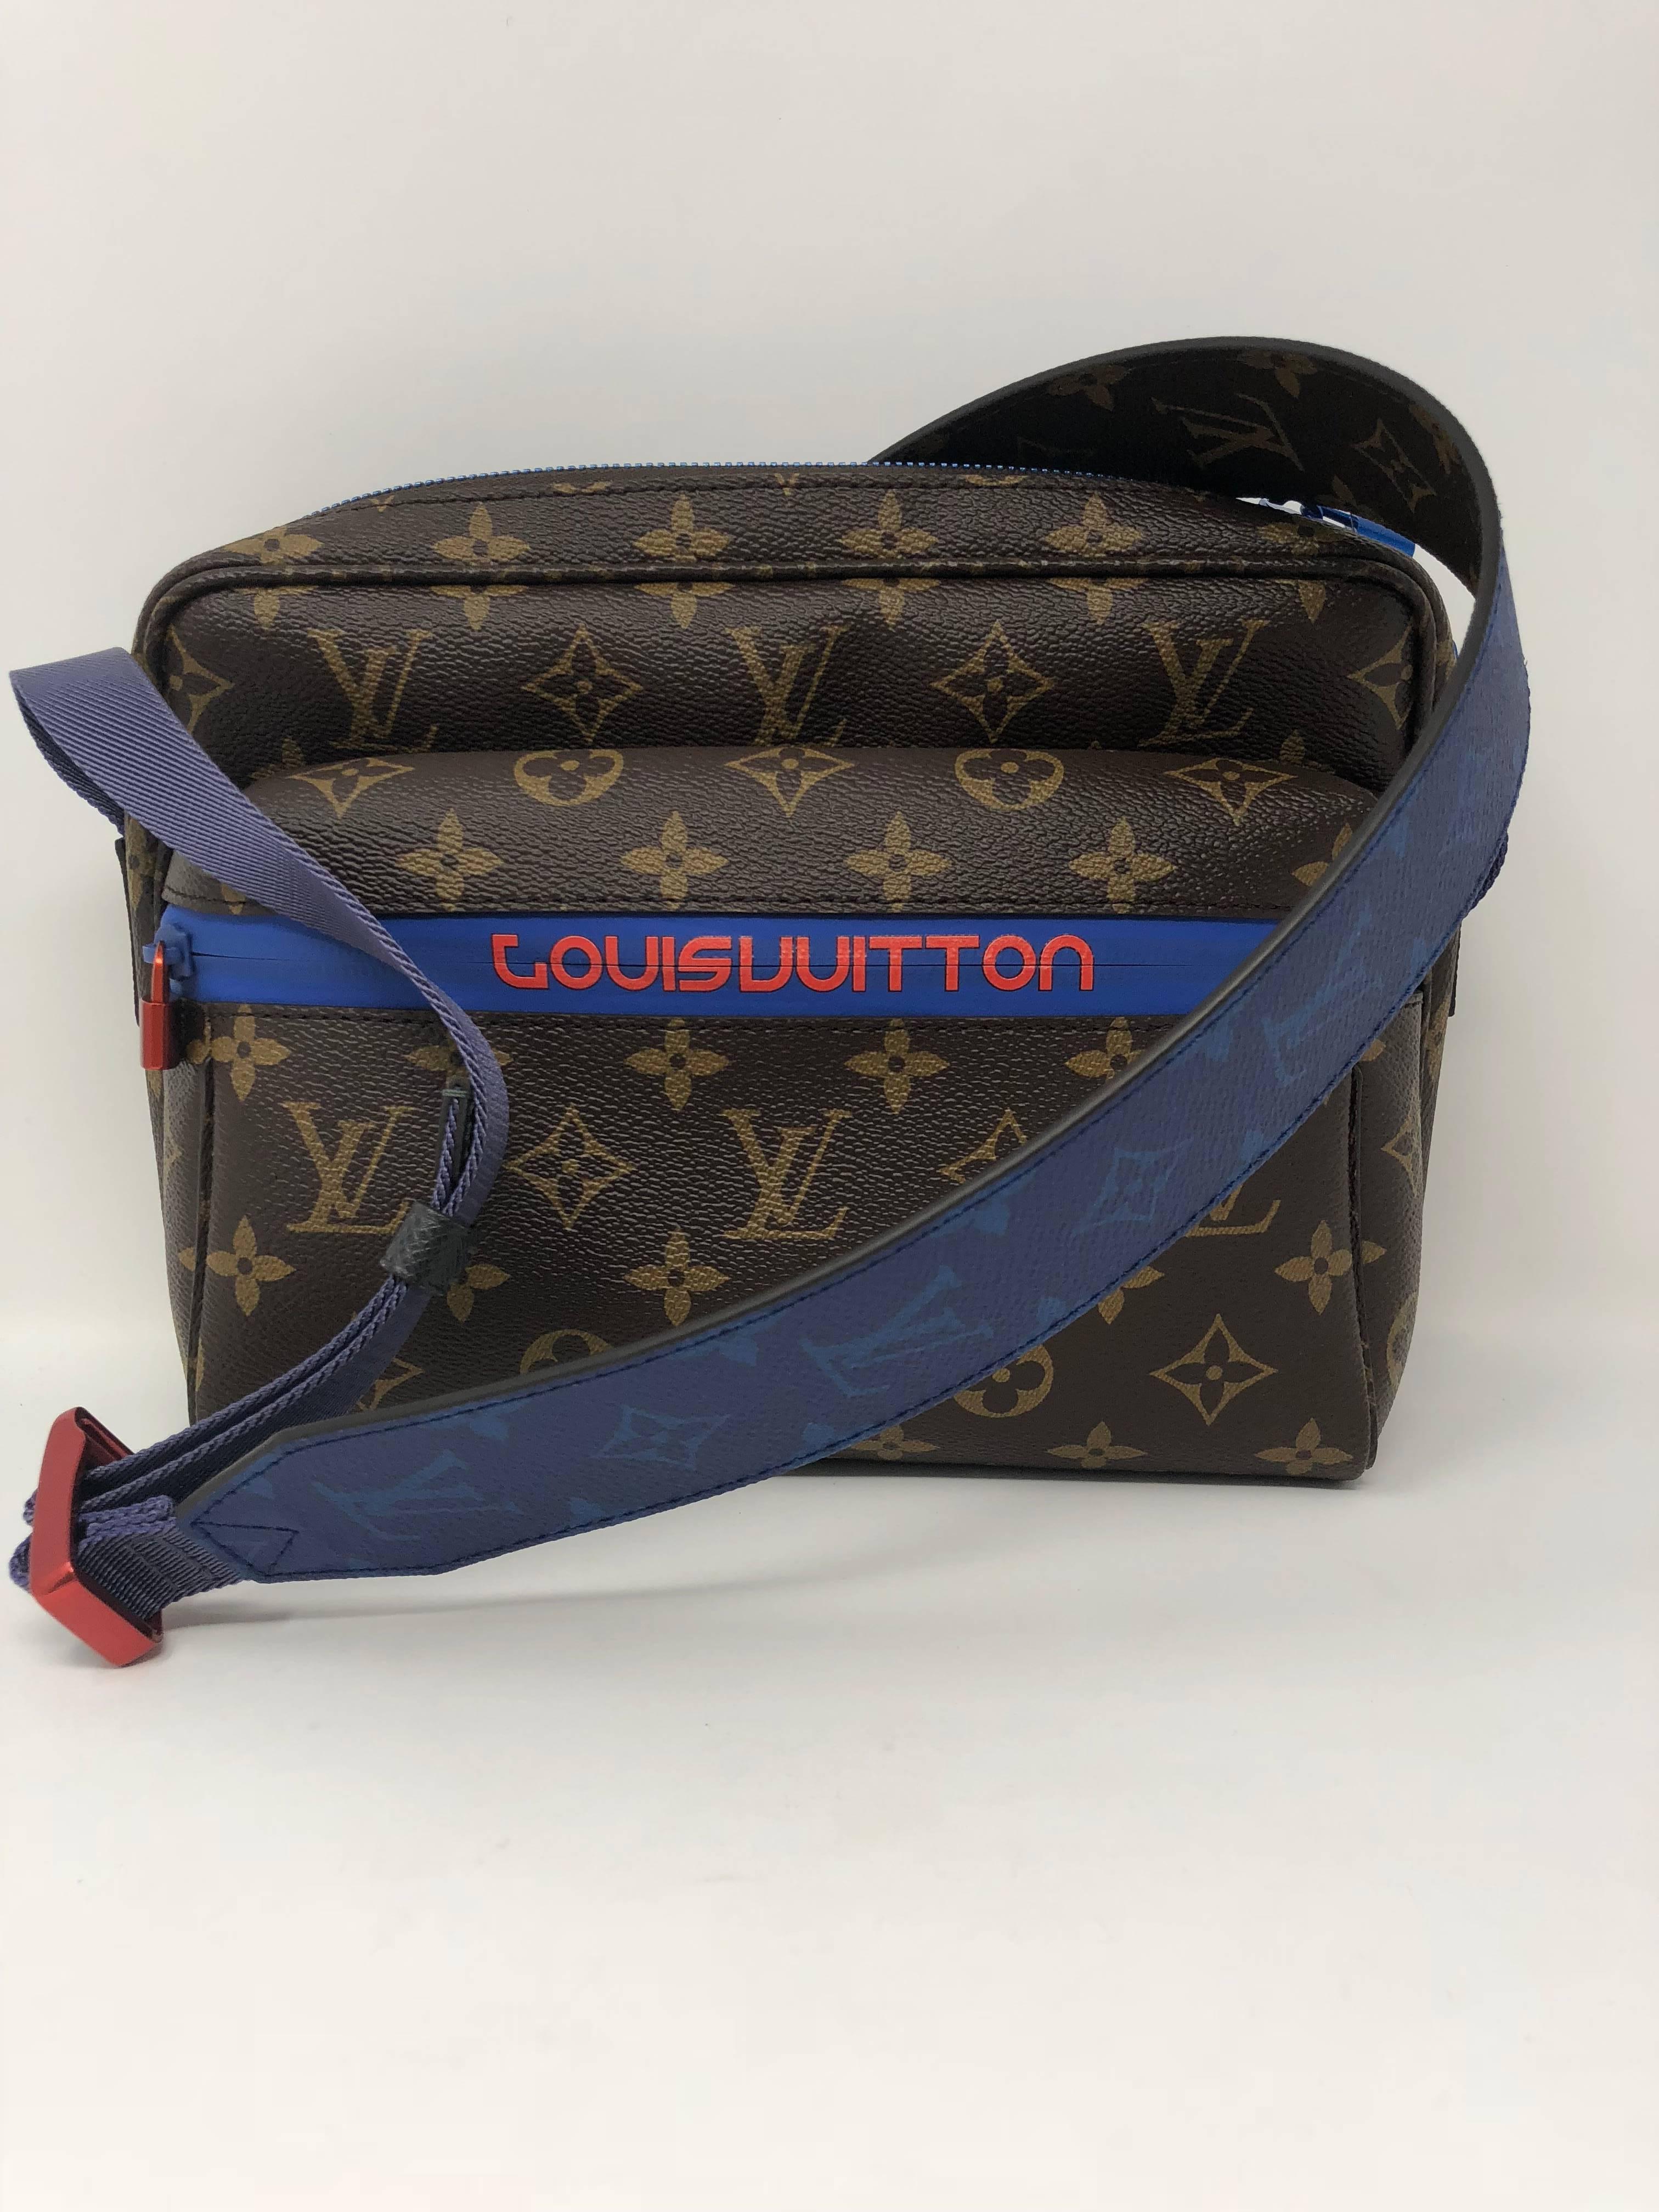 Louis Vuitton messenger monogram outdoor Blue Pacific Split.  Unveiled by Kim Jones at the 2018 Spring-Summer show. Sold out and limited edition.  This crossbody features sporty details like scuba zips and sporty webbing. Brand new condition and